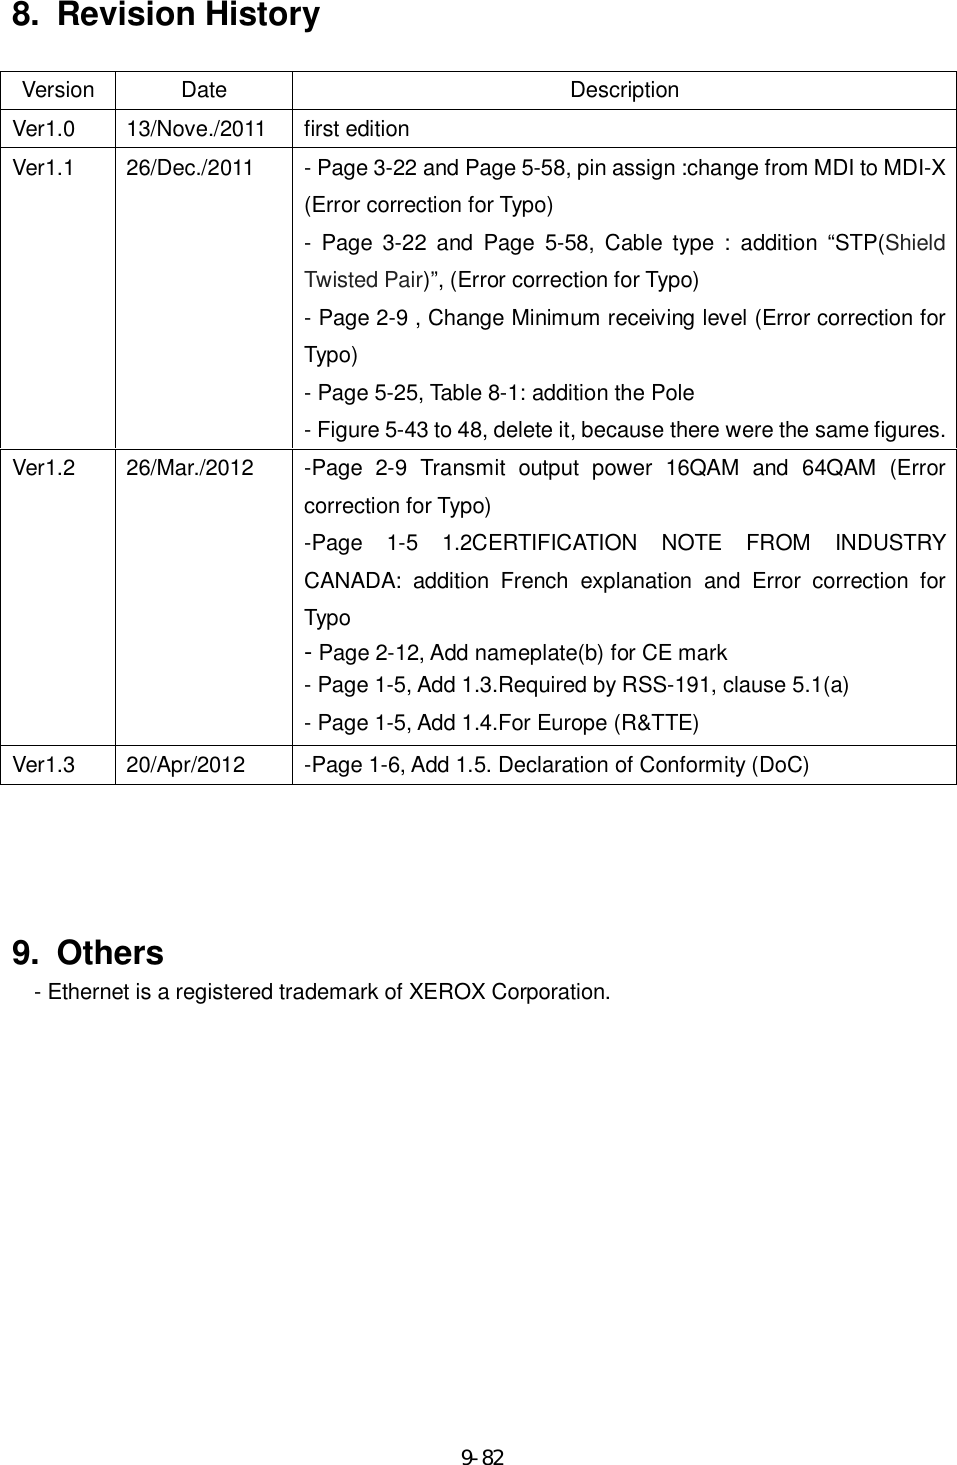     9-828.  Revision History  Version  Date  Description Ver1.0  13/Nove./2011  first edition Ver1.1  26/Dec./2011  - Page 3-22 and Page 5-58, pin assign :change from MDI to MDI-X (Error correction for Typo) -  Page  3-22  and  Page  5-58,  Cable  type  :  addition  “STP(Shield Twisted Pair)”, (Error correction for Typo) - Page 2-9 , Change Minimum receiving level (Error correction for Typo) - Page 5-25, Table 8-1: addition the Pole - Figure 5-43 to 48, delete it, because there were the same figures. Ver1.2  26/Mar./2012  -Page  2-9  Transmit  output  power  16QAM  and  64QAM  (Error correction for Typo) -Page  1-5  1.2CERTIFICATION  NOTE  FROM  INDUSTRY CANADA:  addition  French  explanation  and  Error  correction  for Typo - Page 2-12, Add nameplate(b) for CE mark - Page 1-5, Add 1.3.Required by RSS-191, clause 5.1(a)   - Page 1-5, Add 1.4.For Europe (R&amp;TTE) Ver1.3  20/Apr/2012  -Page 1-6, Add 1.5. Declaration of Conformity (DoC)     9.  Others - Ethernet is a registered trademark of XEROX Corporation. 